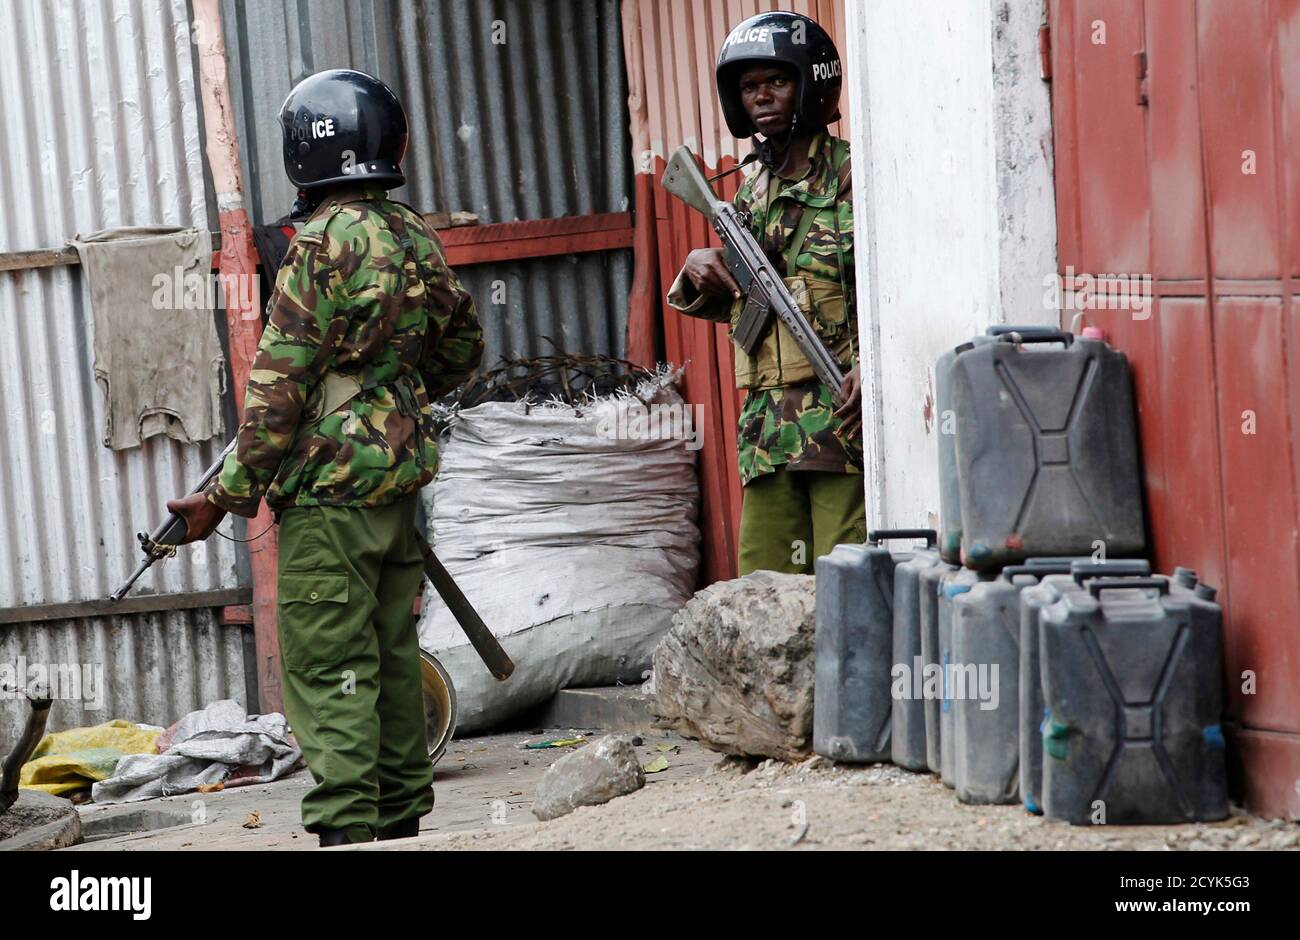 Policemen patrol deserted streets of the Kenyan coastal city of Mombasa, August 29, 2012. Kenya's prime minister said on Wednesday the country's enemies were behind the killing of a Muslim cleric that triggered riots he described as being conducted by an 'underground organisation' to create divisions between Christians and Muslims. REUTERS/Thomas Mukoya (KENYA - Tags: SOCIETY RELIGION POLITICS CIVIL UNREST) Stock Photo